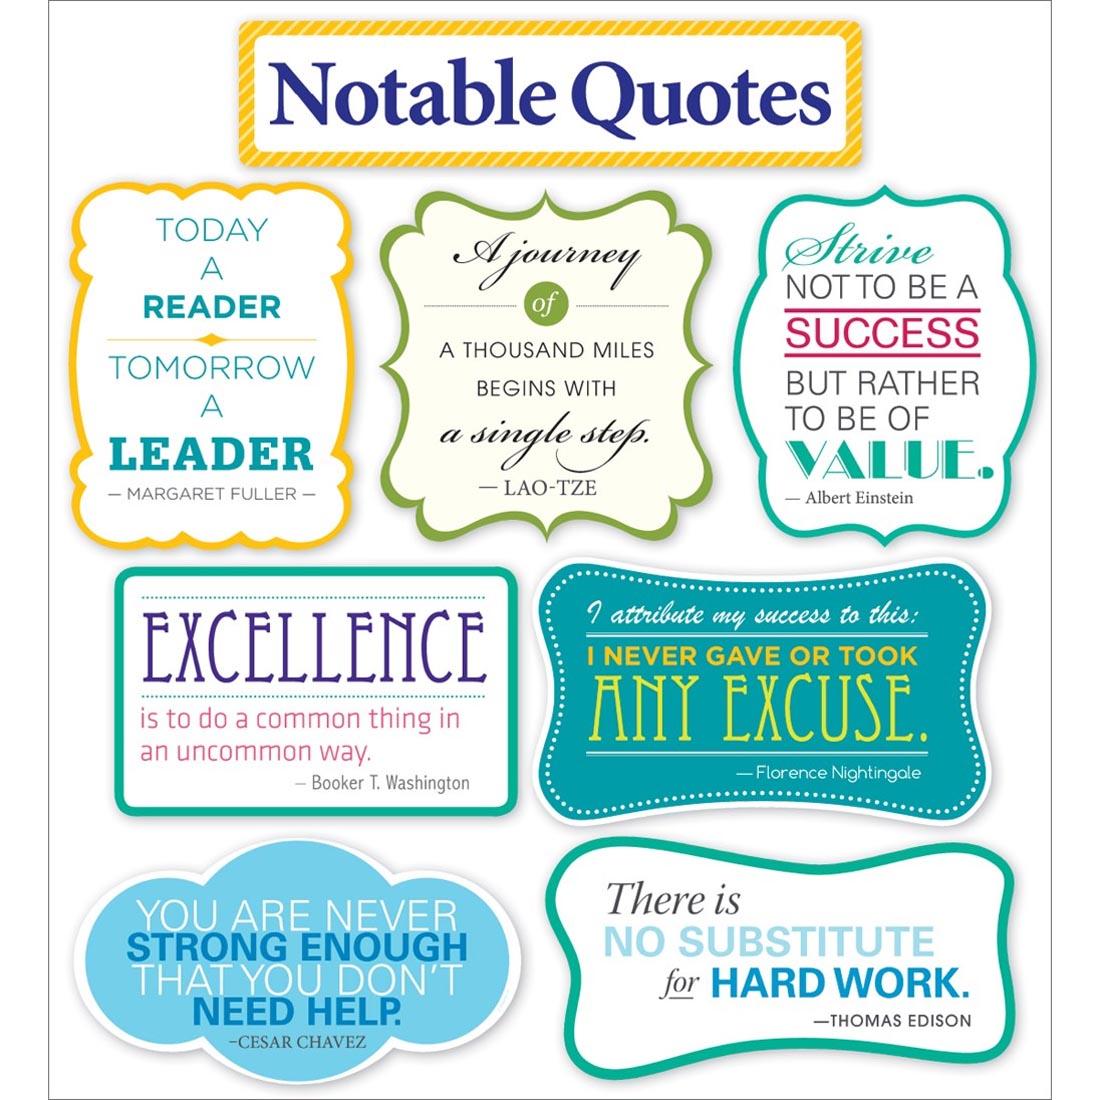 Notable Quotes Bulletin Board Set by Scholastic includes Margaret Fuller, Lao-Tze, Albert Einstein, Booker T Washington, Florence Nightingale, Cesar Chavez and Thomas Edison